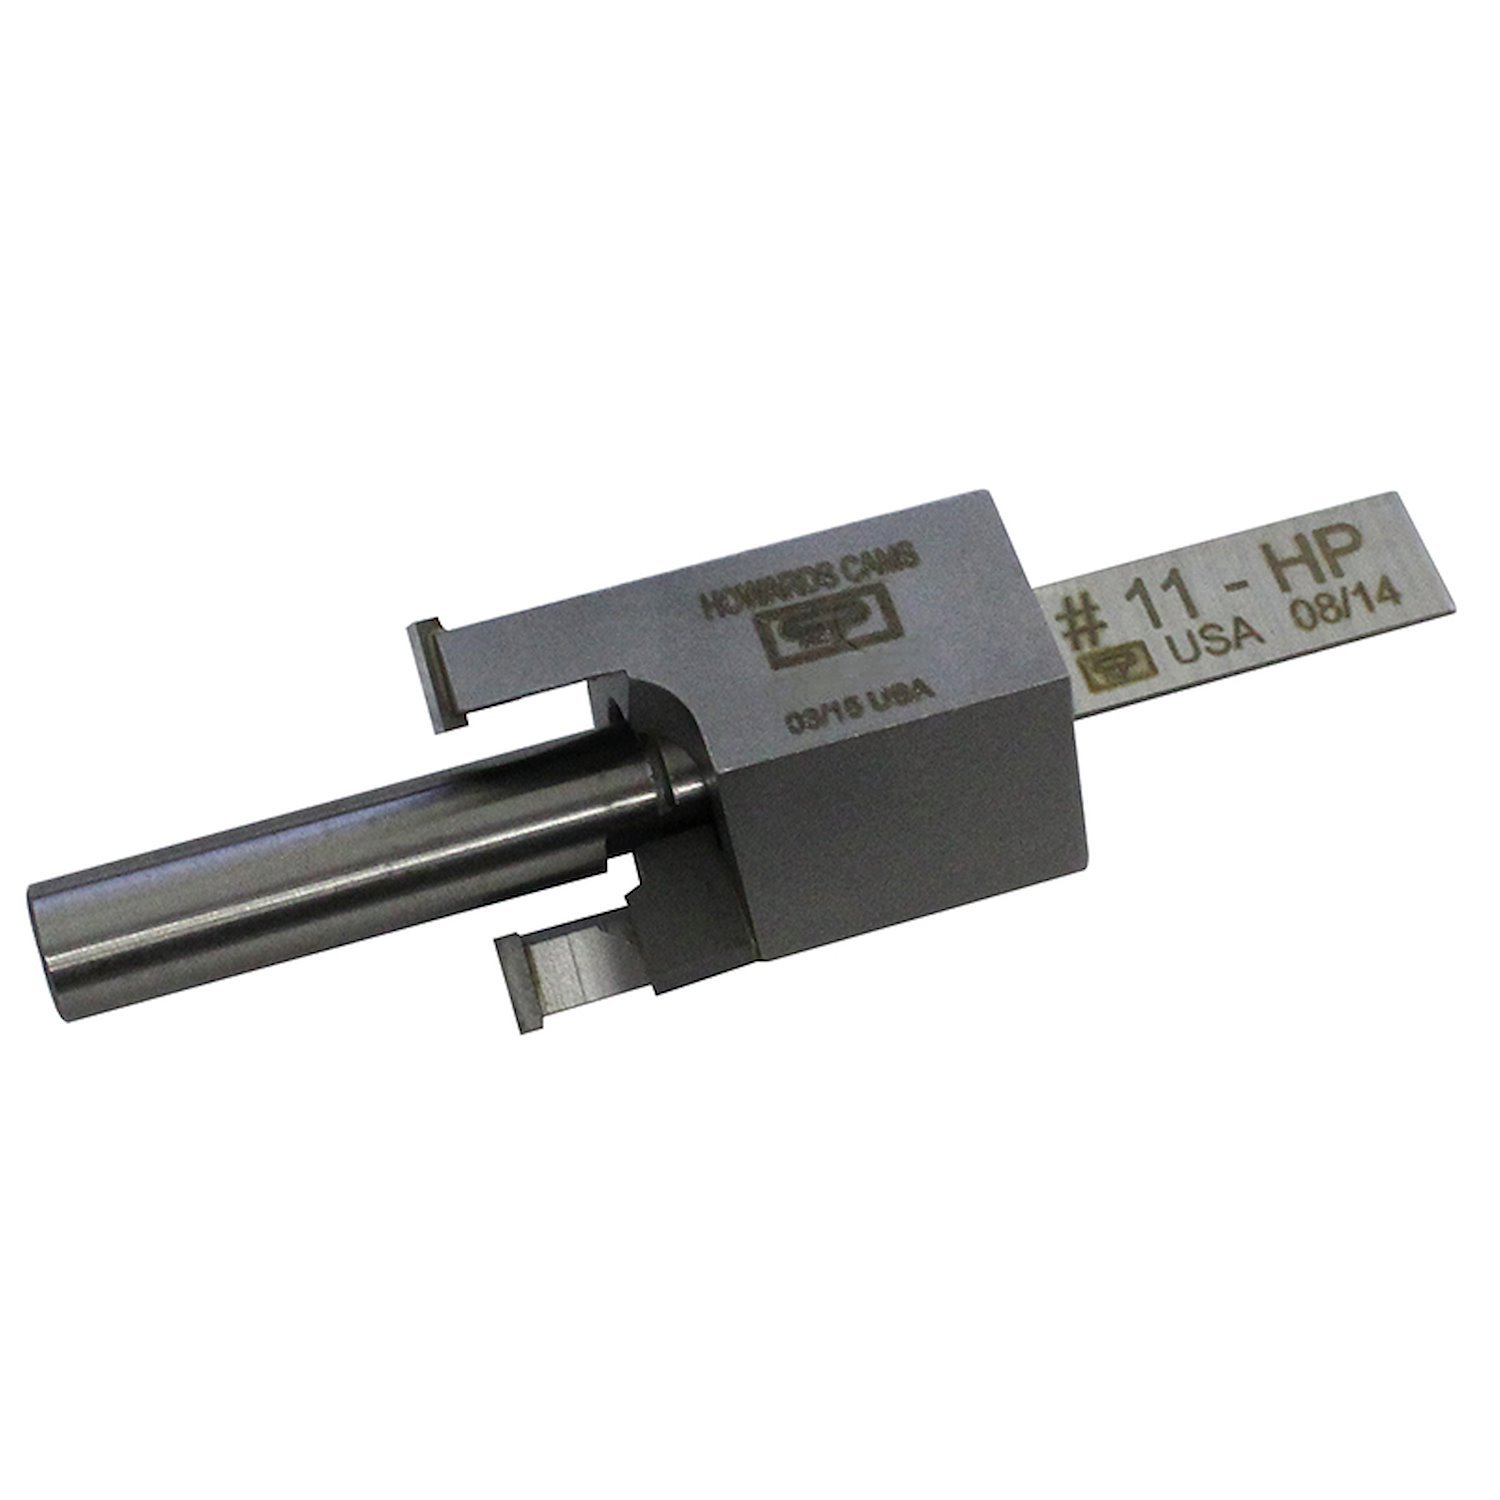 Valve Guide Cutting Tool 3/8 in. x 0.531 in.